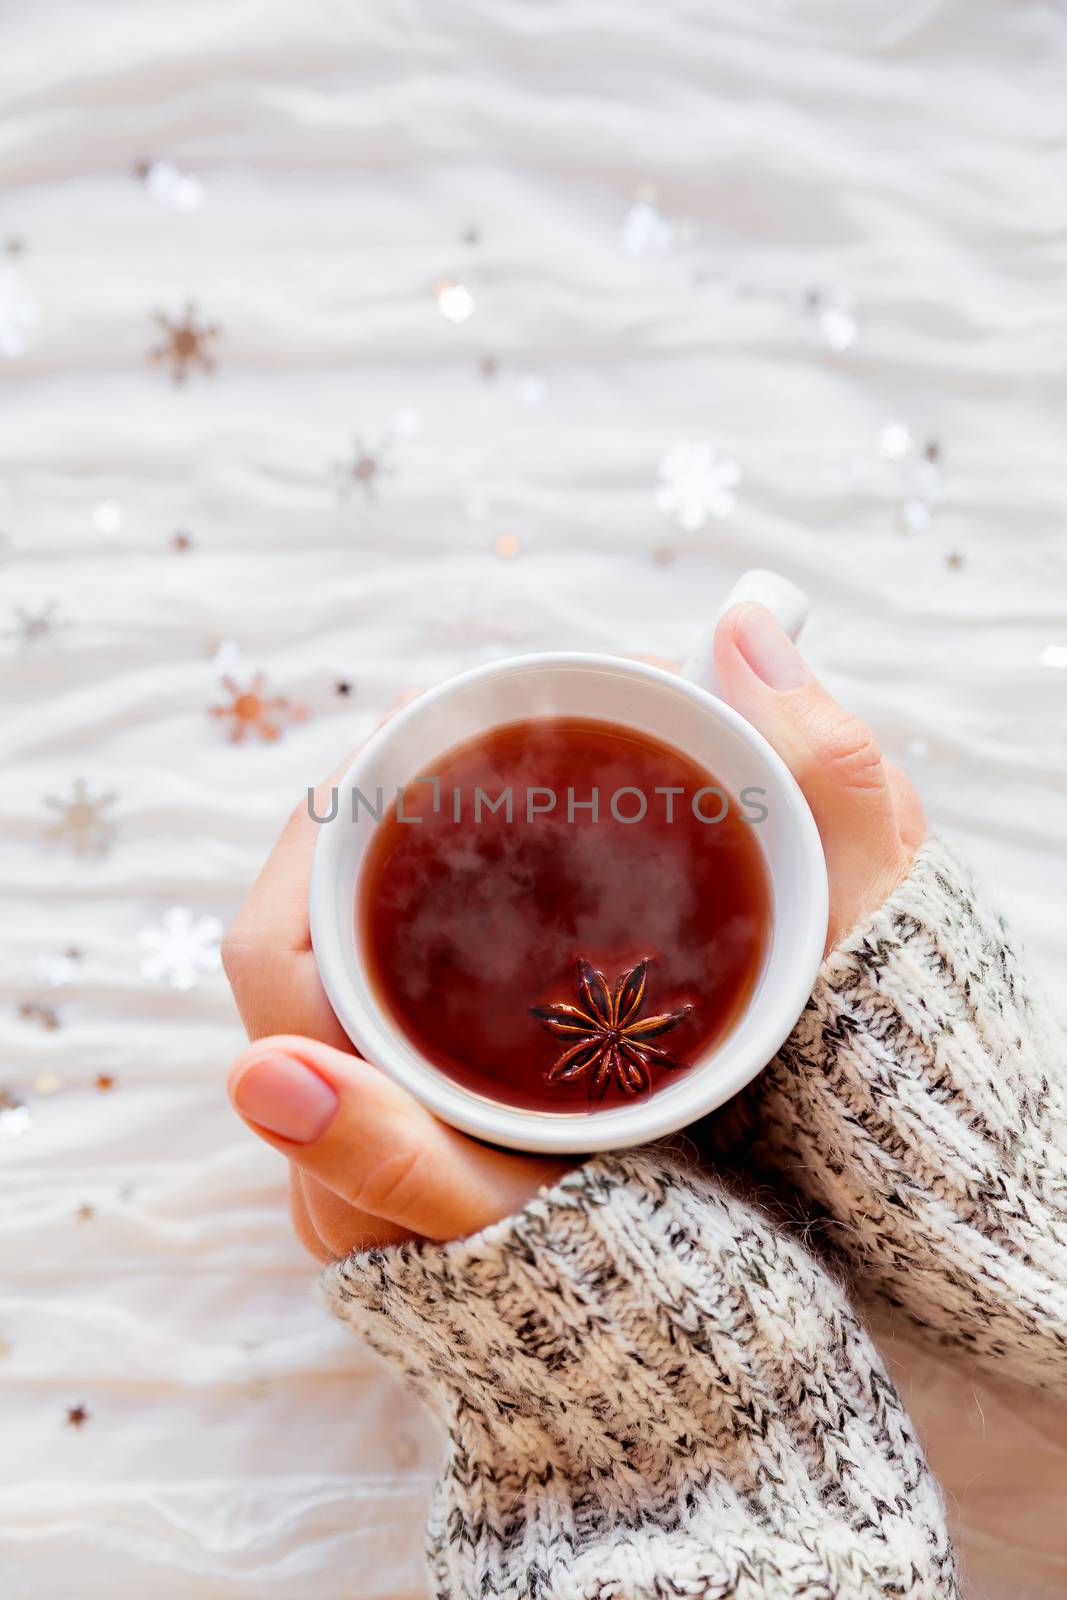 Woman holds a cup of hot tea with anise star. Winter fabric background with sparkling silver snowflakes.